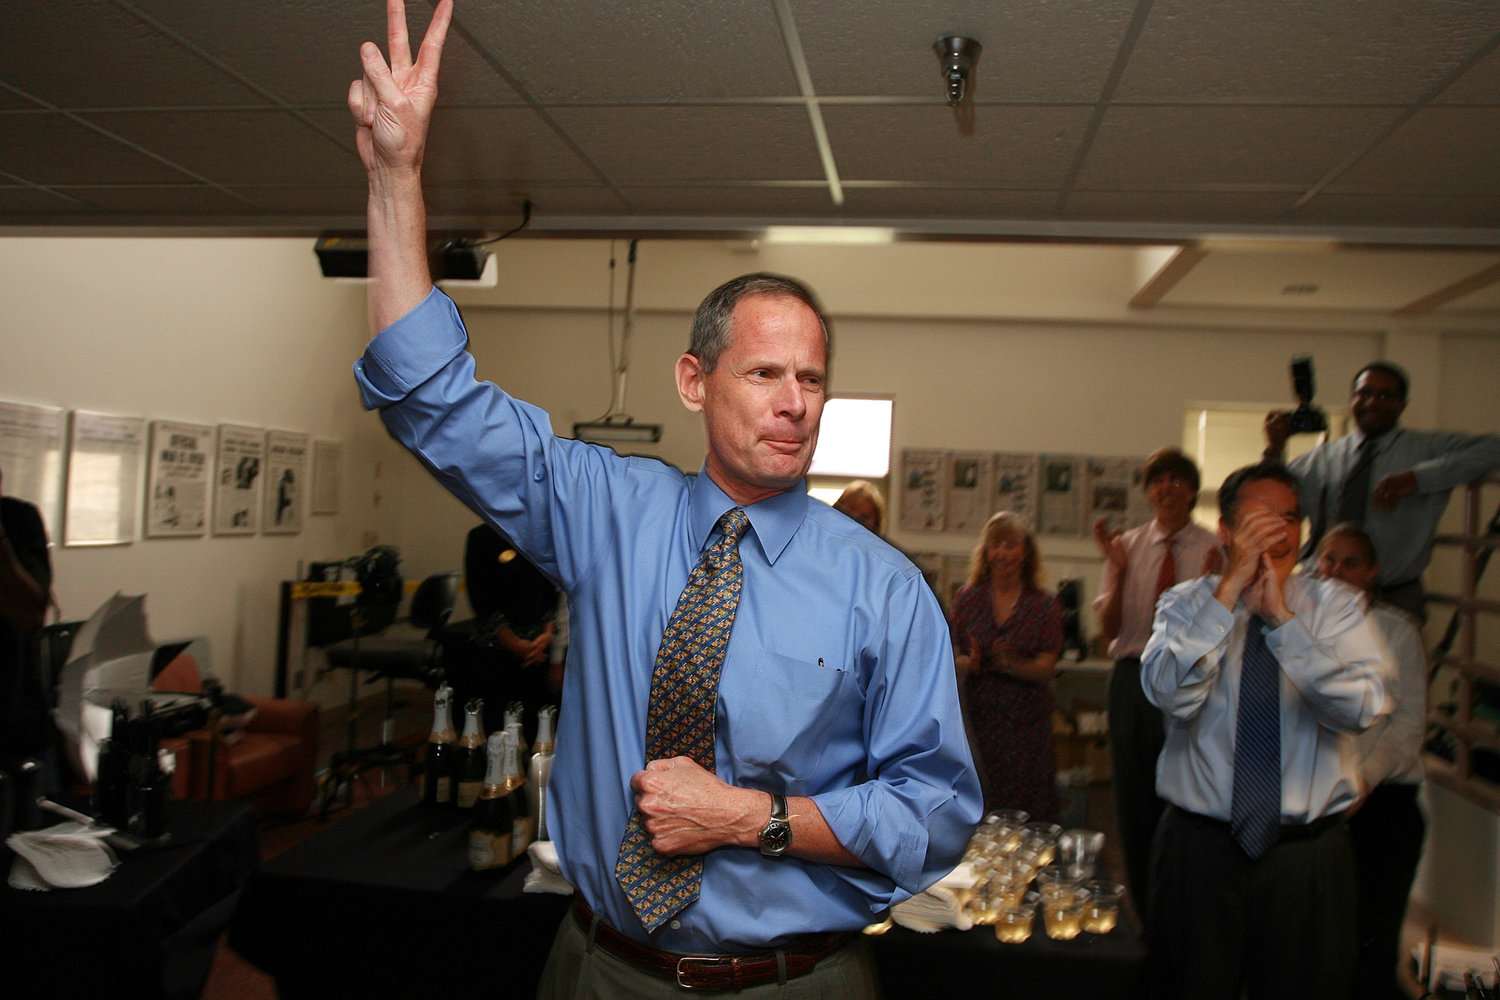 Paul Tash, chairman and CEO of the Tampa Bay Times, celebrates two of the newspaper's Pulitzer Prize wins, for feature reporting and national reporting, in 2009. It marked the first time the Times had won two Pulitzers in one year. Tash retired as CEO of the company on Thursday and will step down as chairman in July. (Photo by Scott Keeler / Tampa Bay Times)